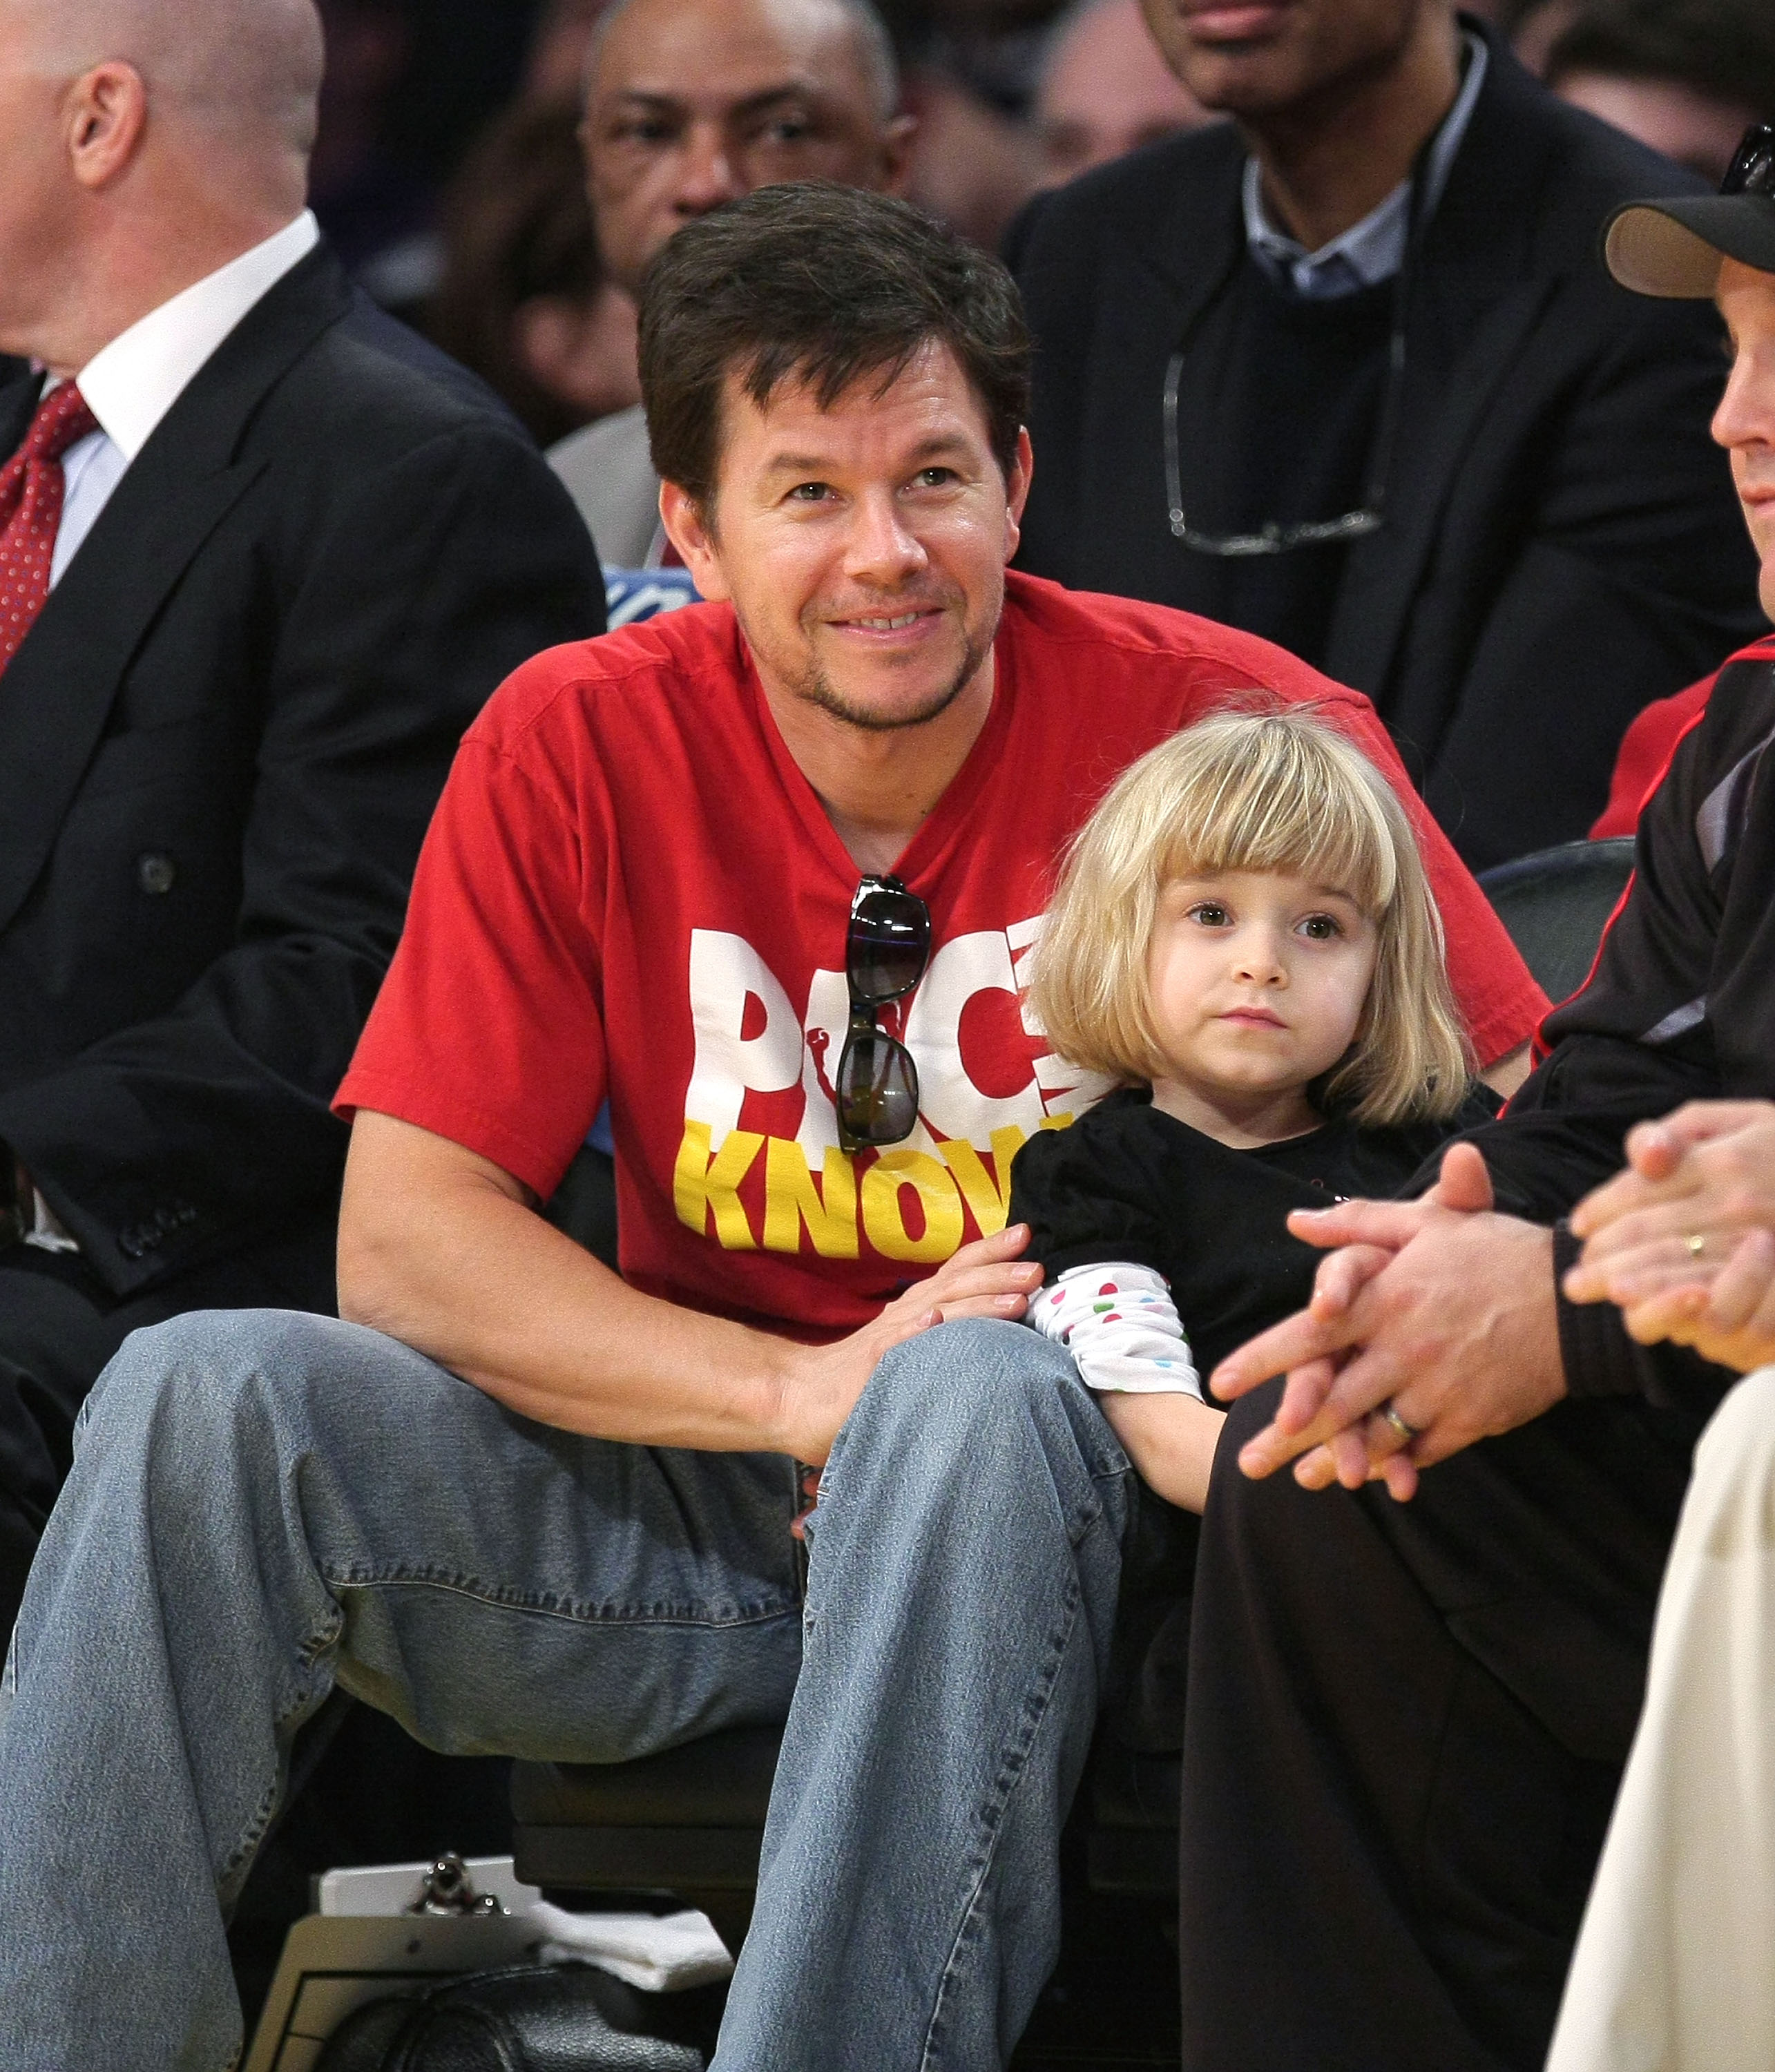 <p>Mark Wahlberg brought the oldest of his four kids with model wife Rhea Durham, daughter Ella -- who was 5 at the time -- to a Los Angeles Lakers vs. Boston Celtics NBA game at the Staples Center in Los Angeles on Christmas Day 2008.</p>